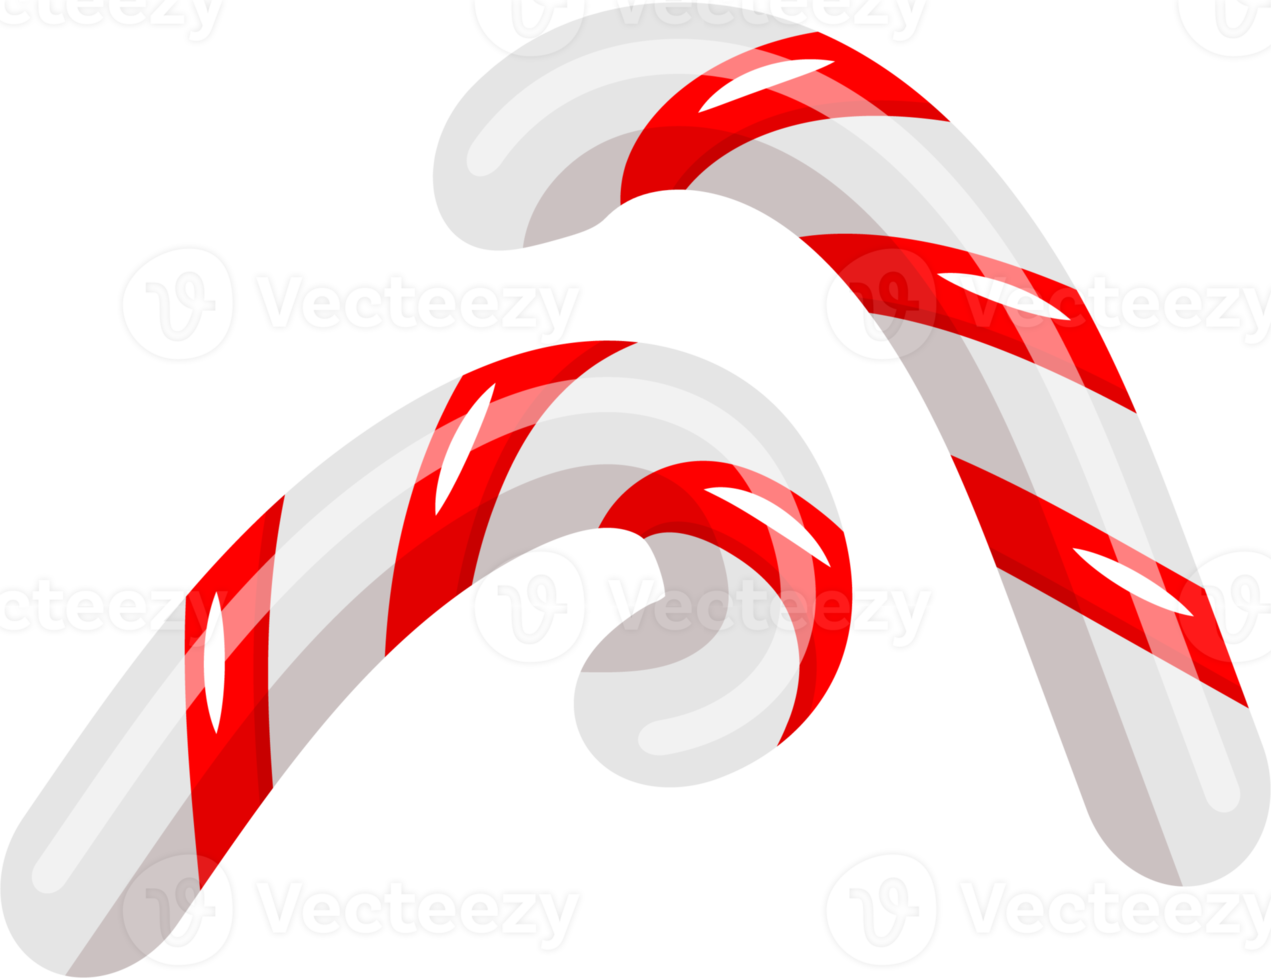 Christmas lollipop candy cane icon in cartoon style png